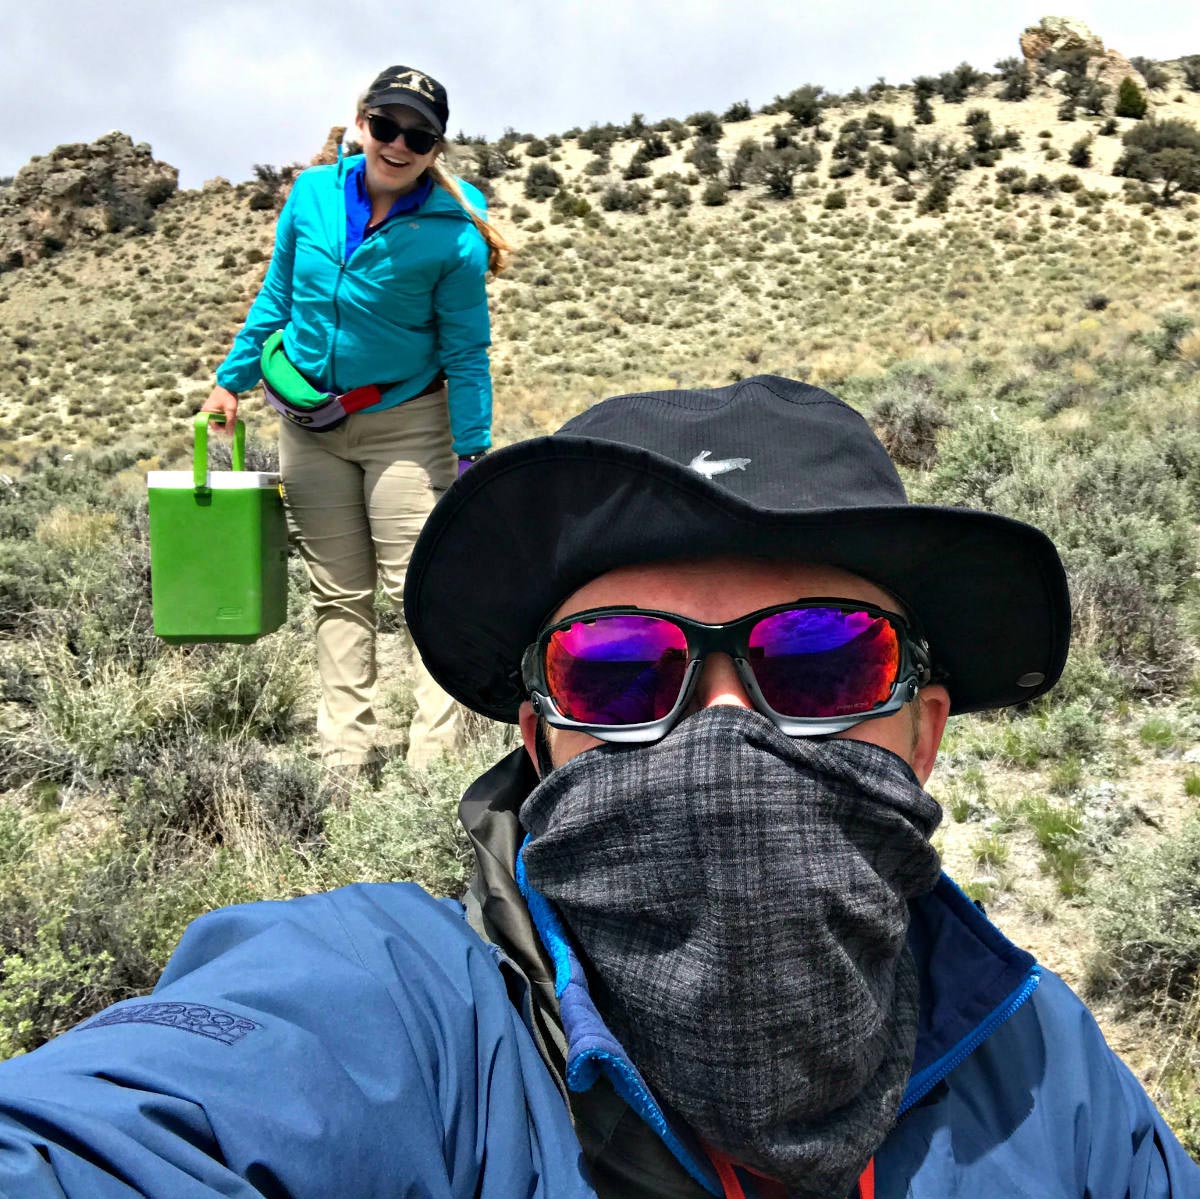 Masked person takes selfie with another person in background